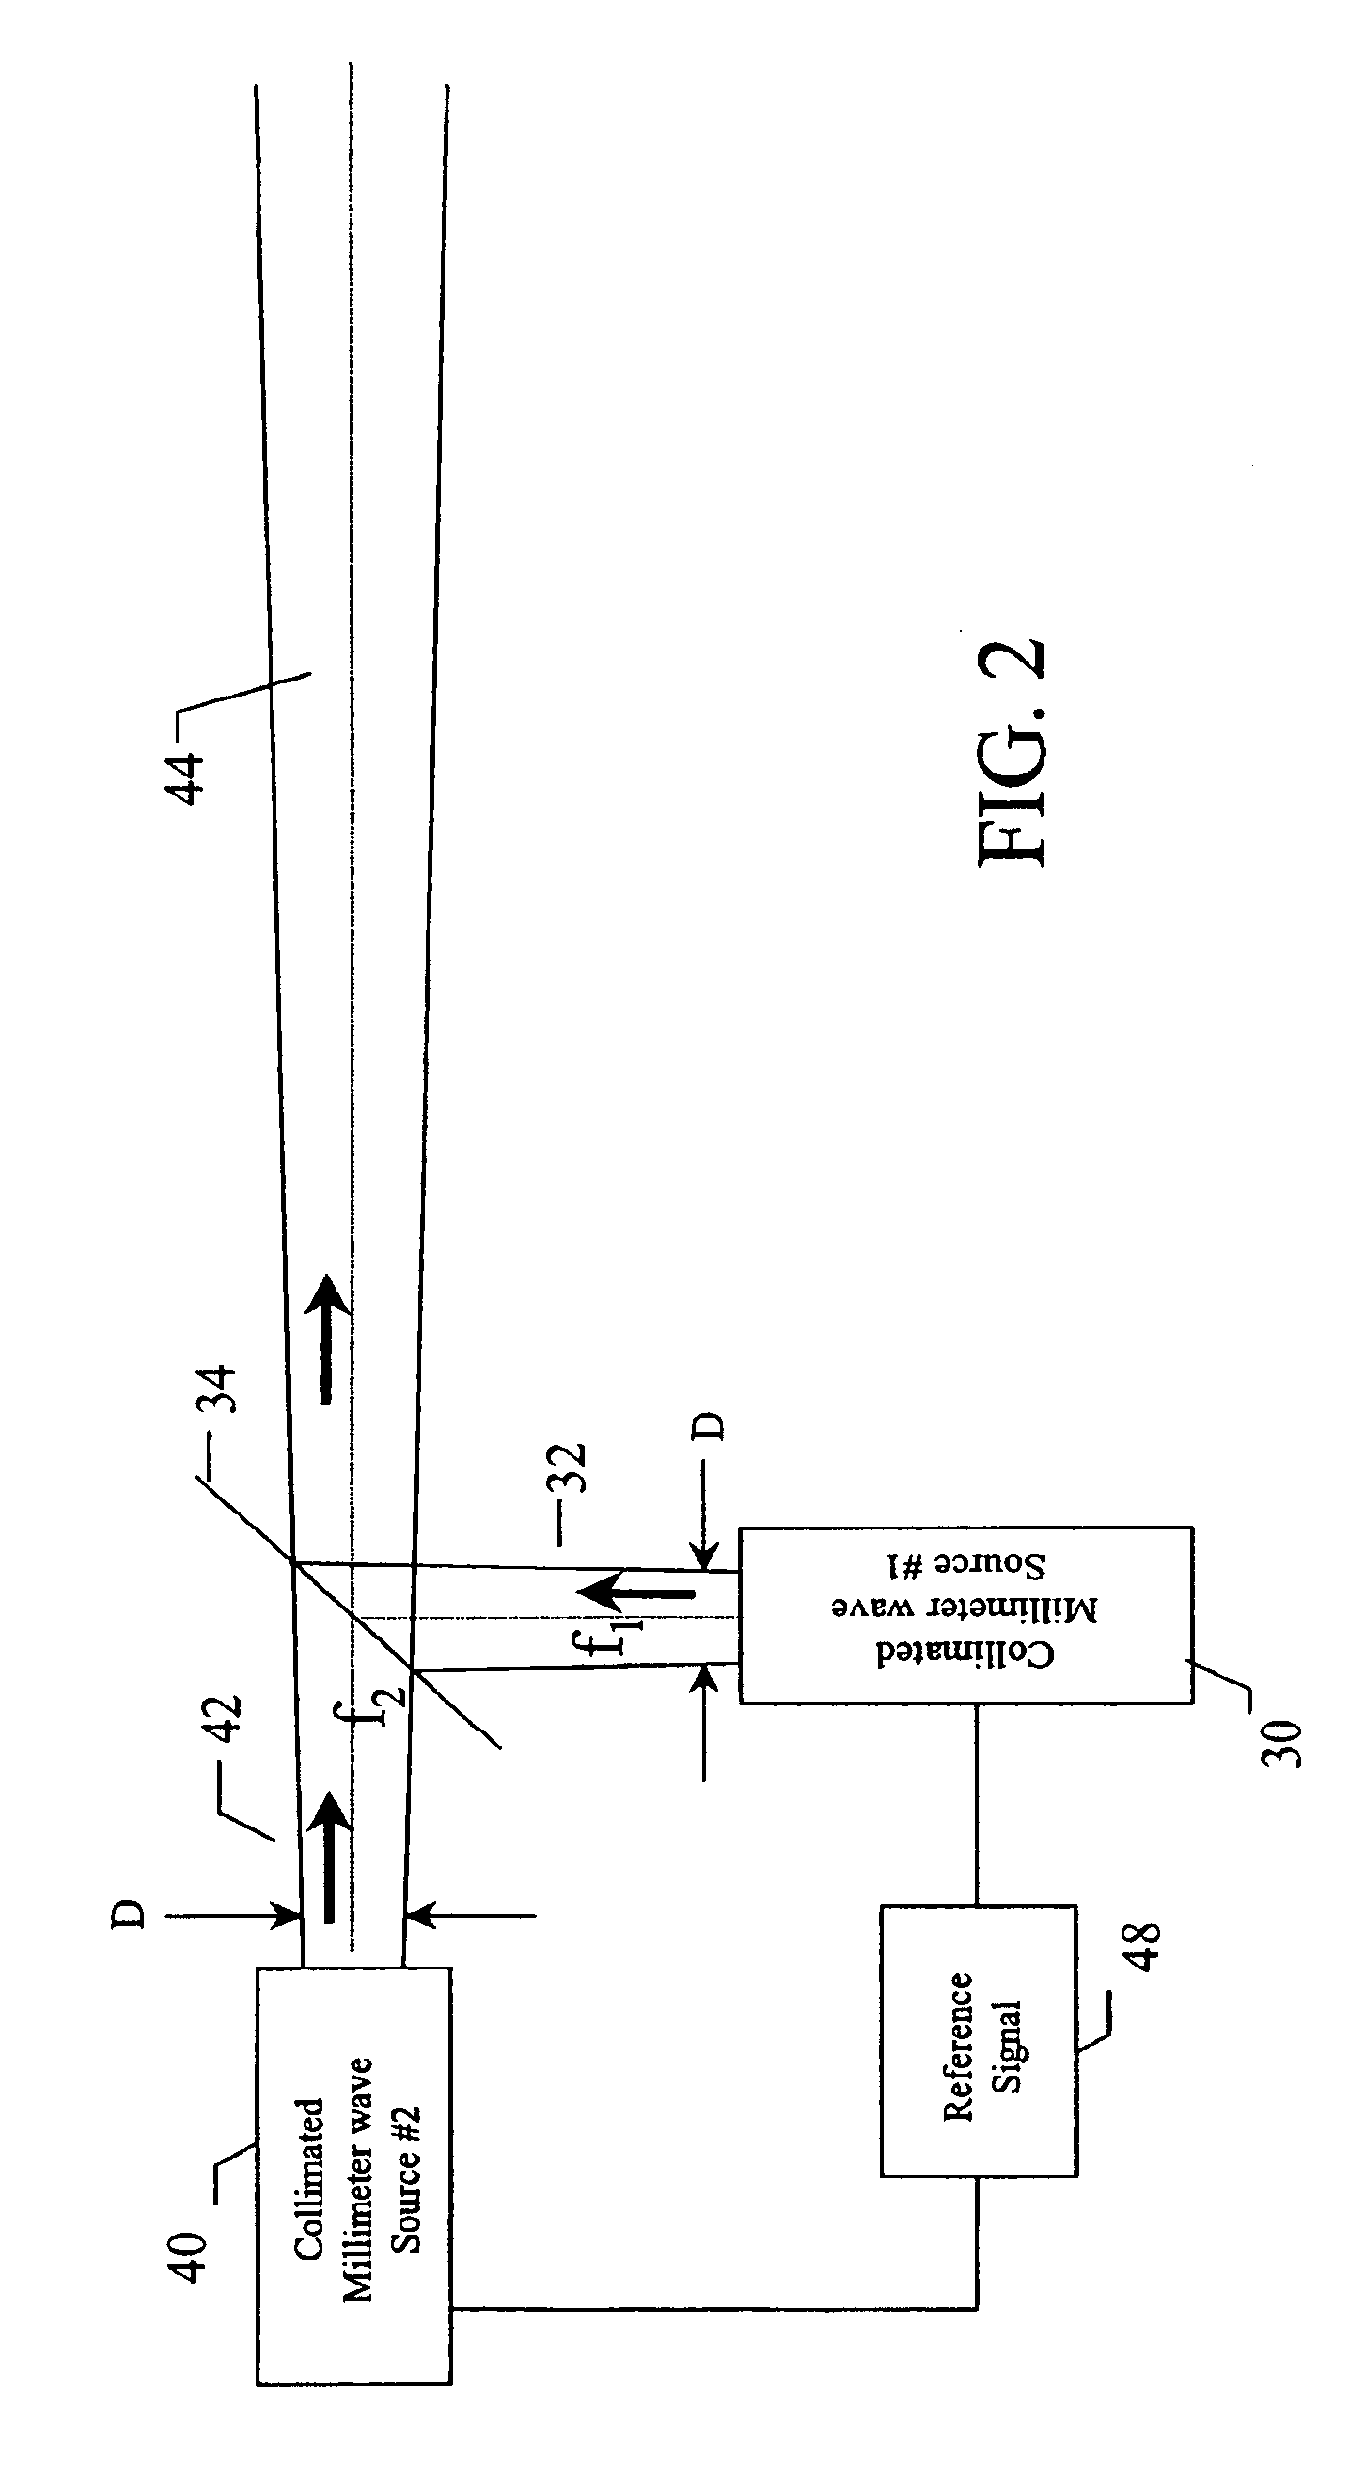 Method and apparatus for directing electromagnetic radiation to distant locations